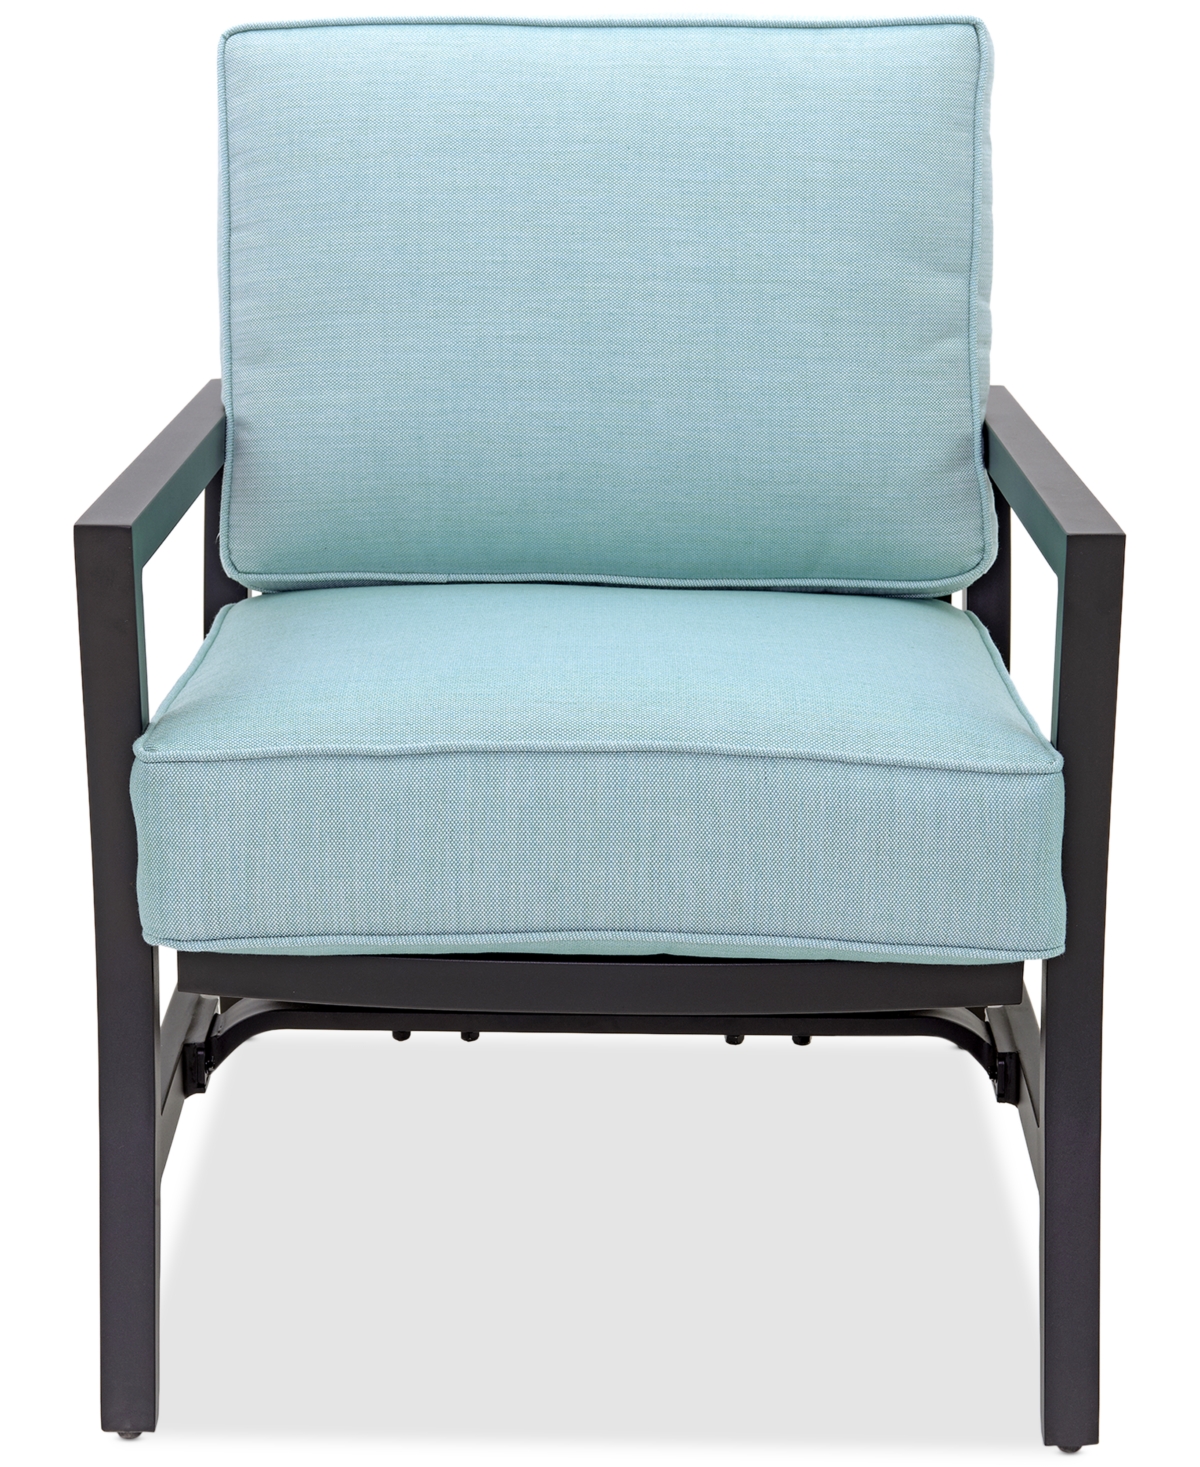 Shop Agio Astaire Outdoor 3-pc Rocker Chair Set (2 Rocker Chairs + 1 End Table) In Spa Light Blue